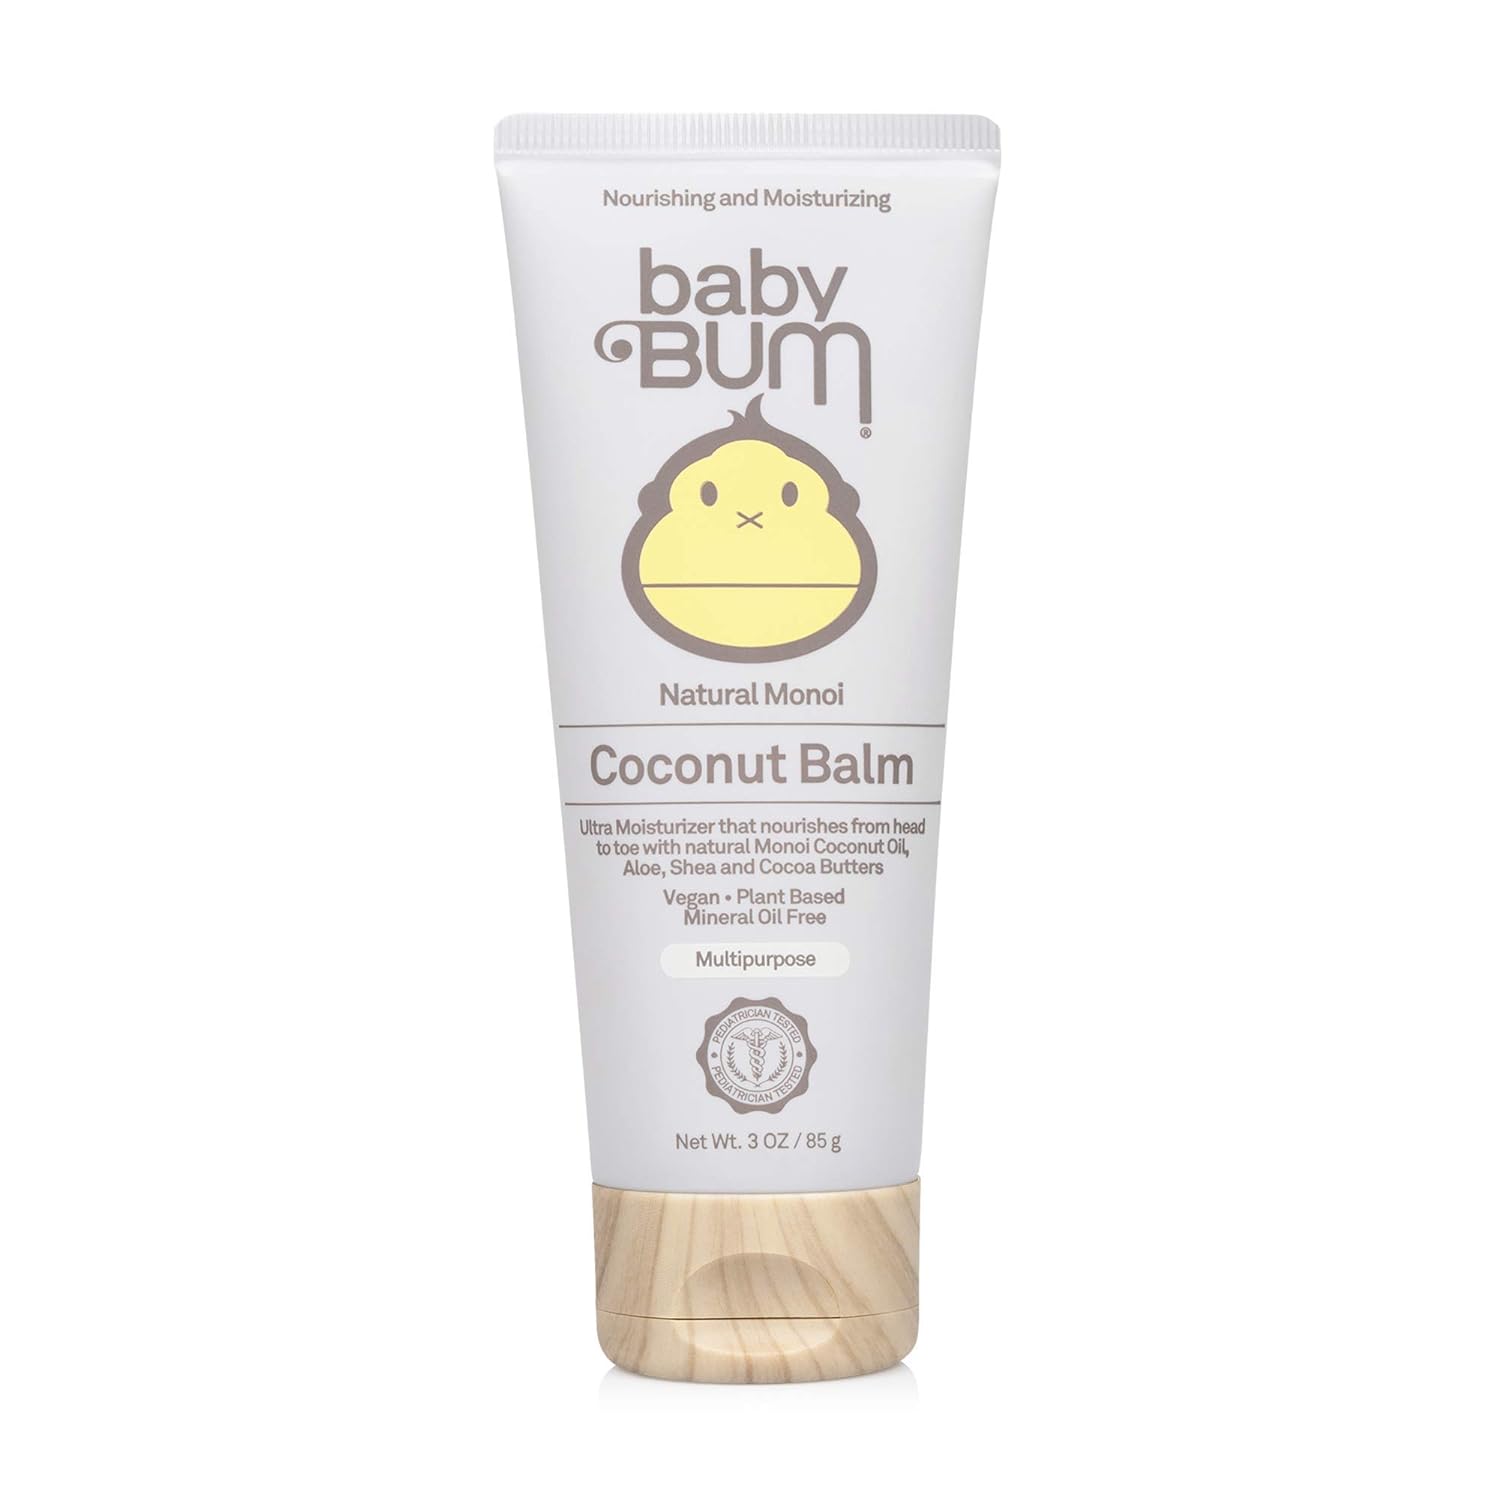 Baby Bum Monoi Coconut Balm | Natural Multipurpose Moisturizing Coconut Oil for Sensitive Skin with Shea and Cocoa Butter| Natural Fragrance | Gluten Free and Vegan | 3 Oz